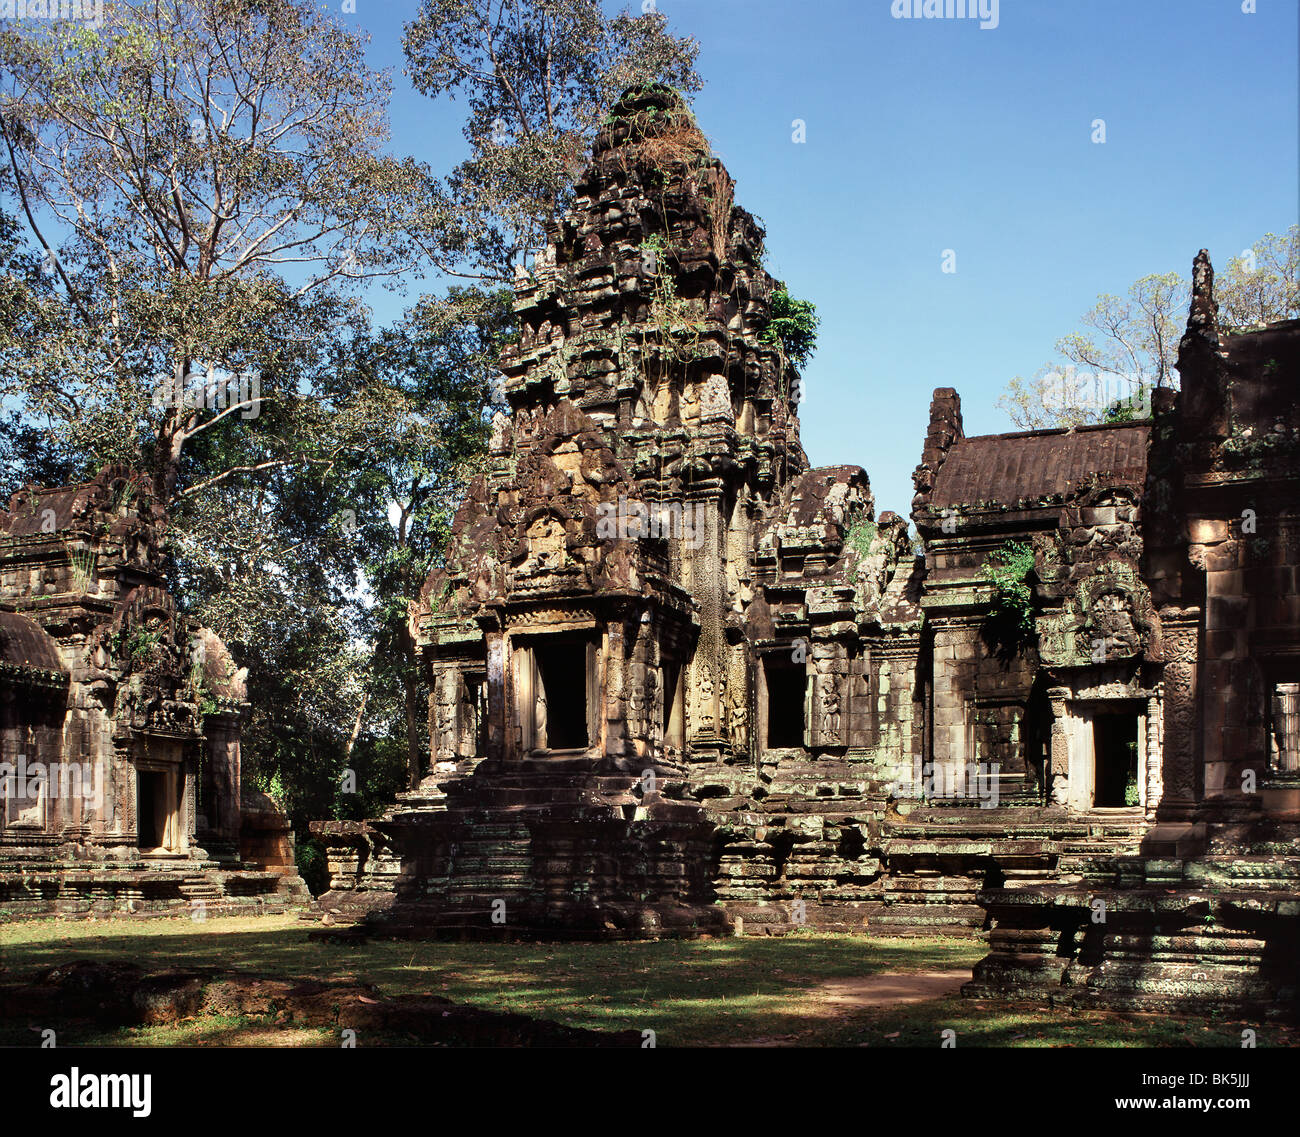 Thommanon, dating from the early 12th century, Angkor, UNESCO World Heritage Site, Cambodia, Indochina, Southeast Asia, Asia Stock Photo